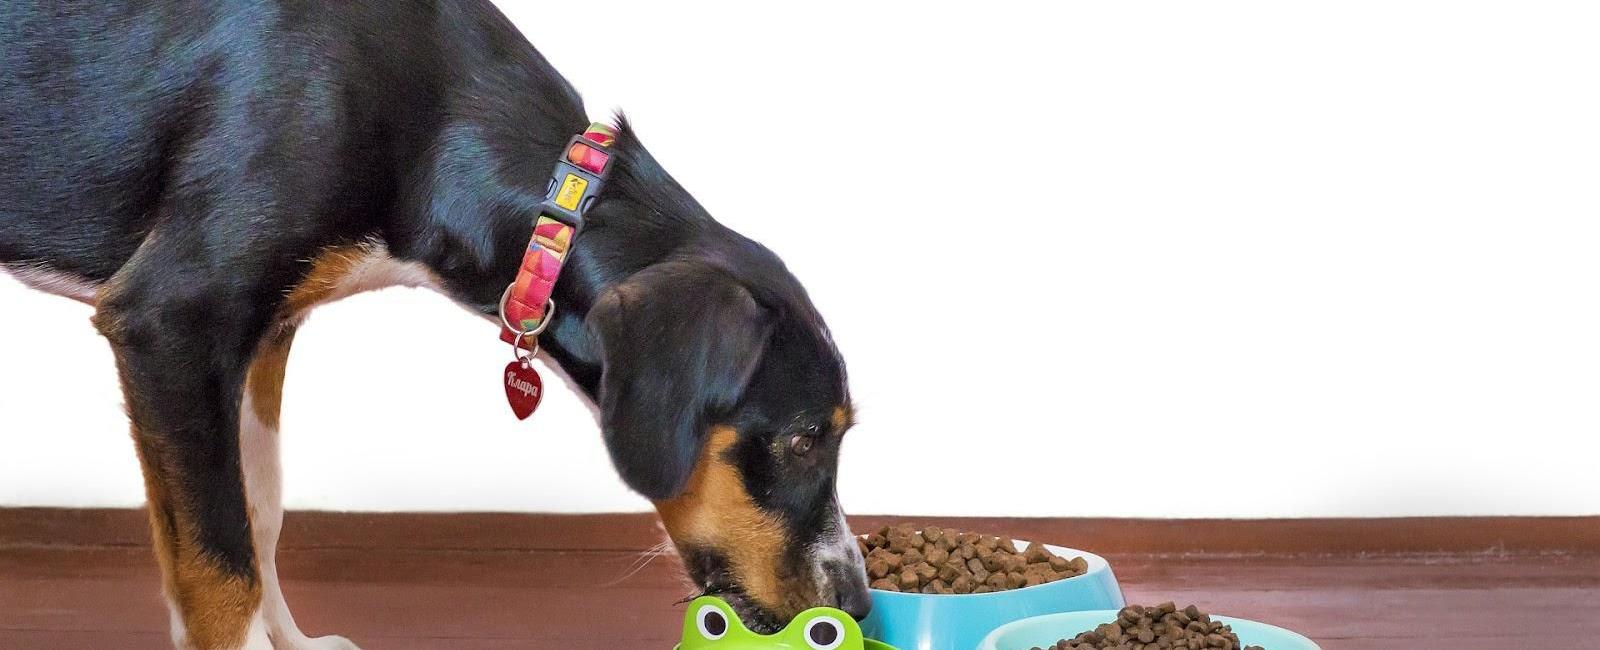 Why Don't Dogs Chew Their Food?